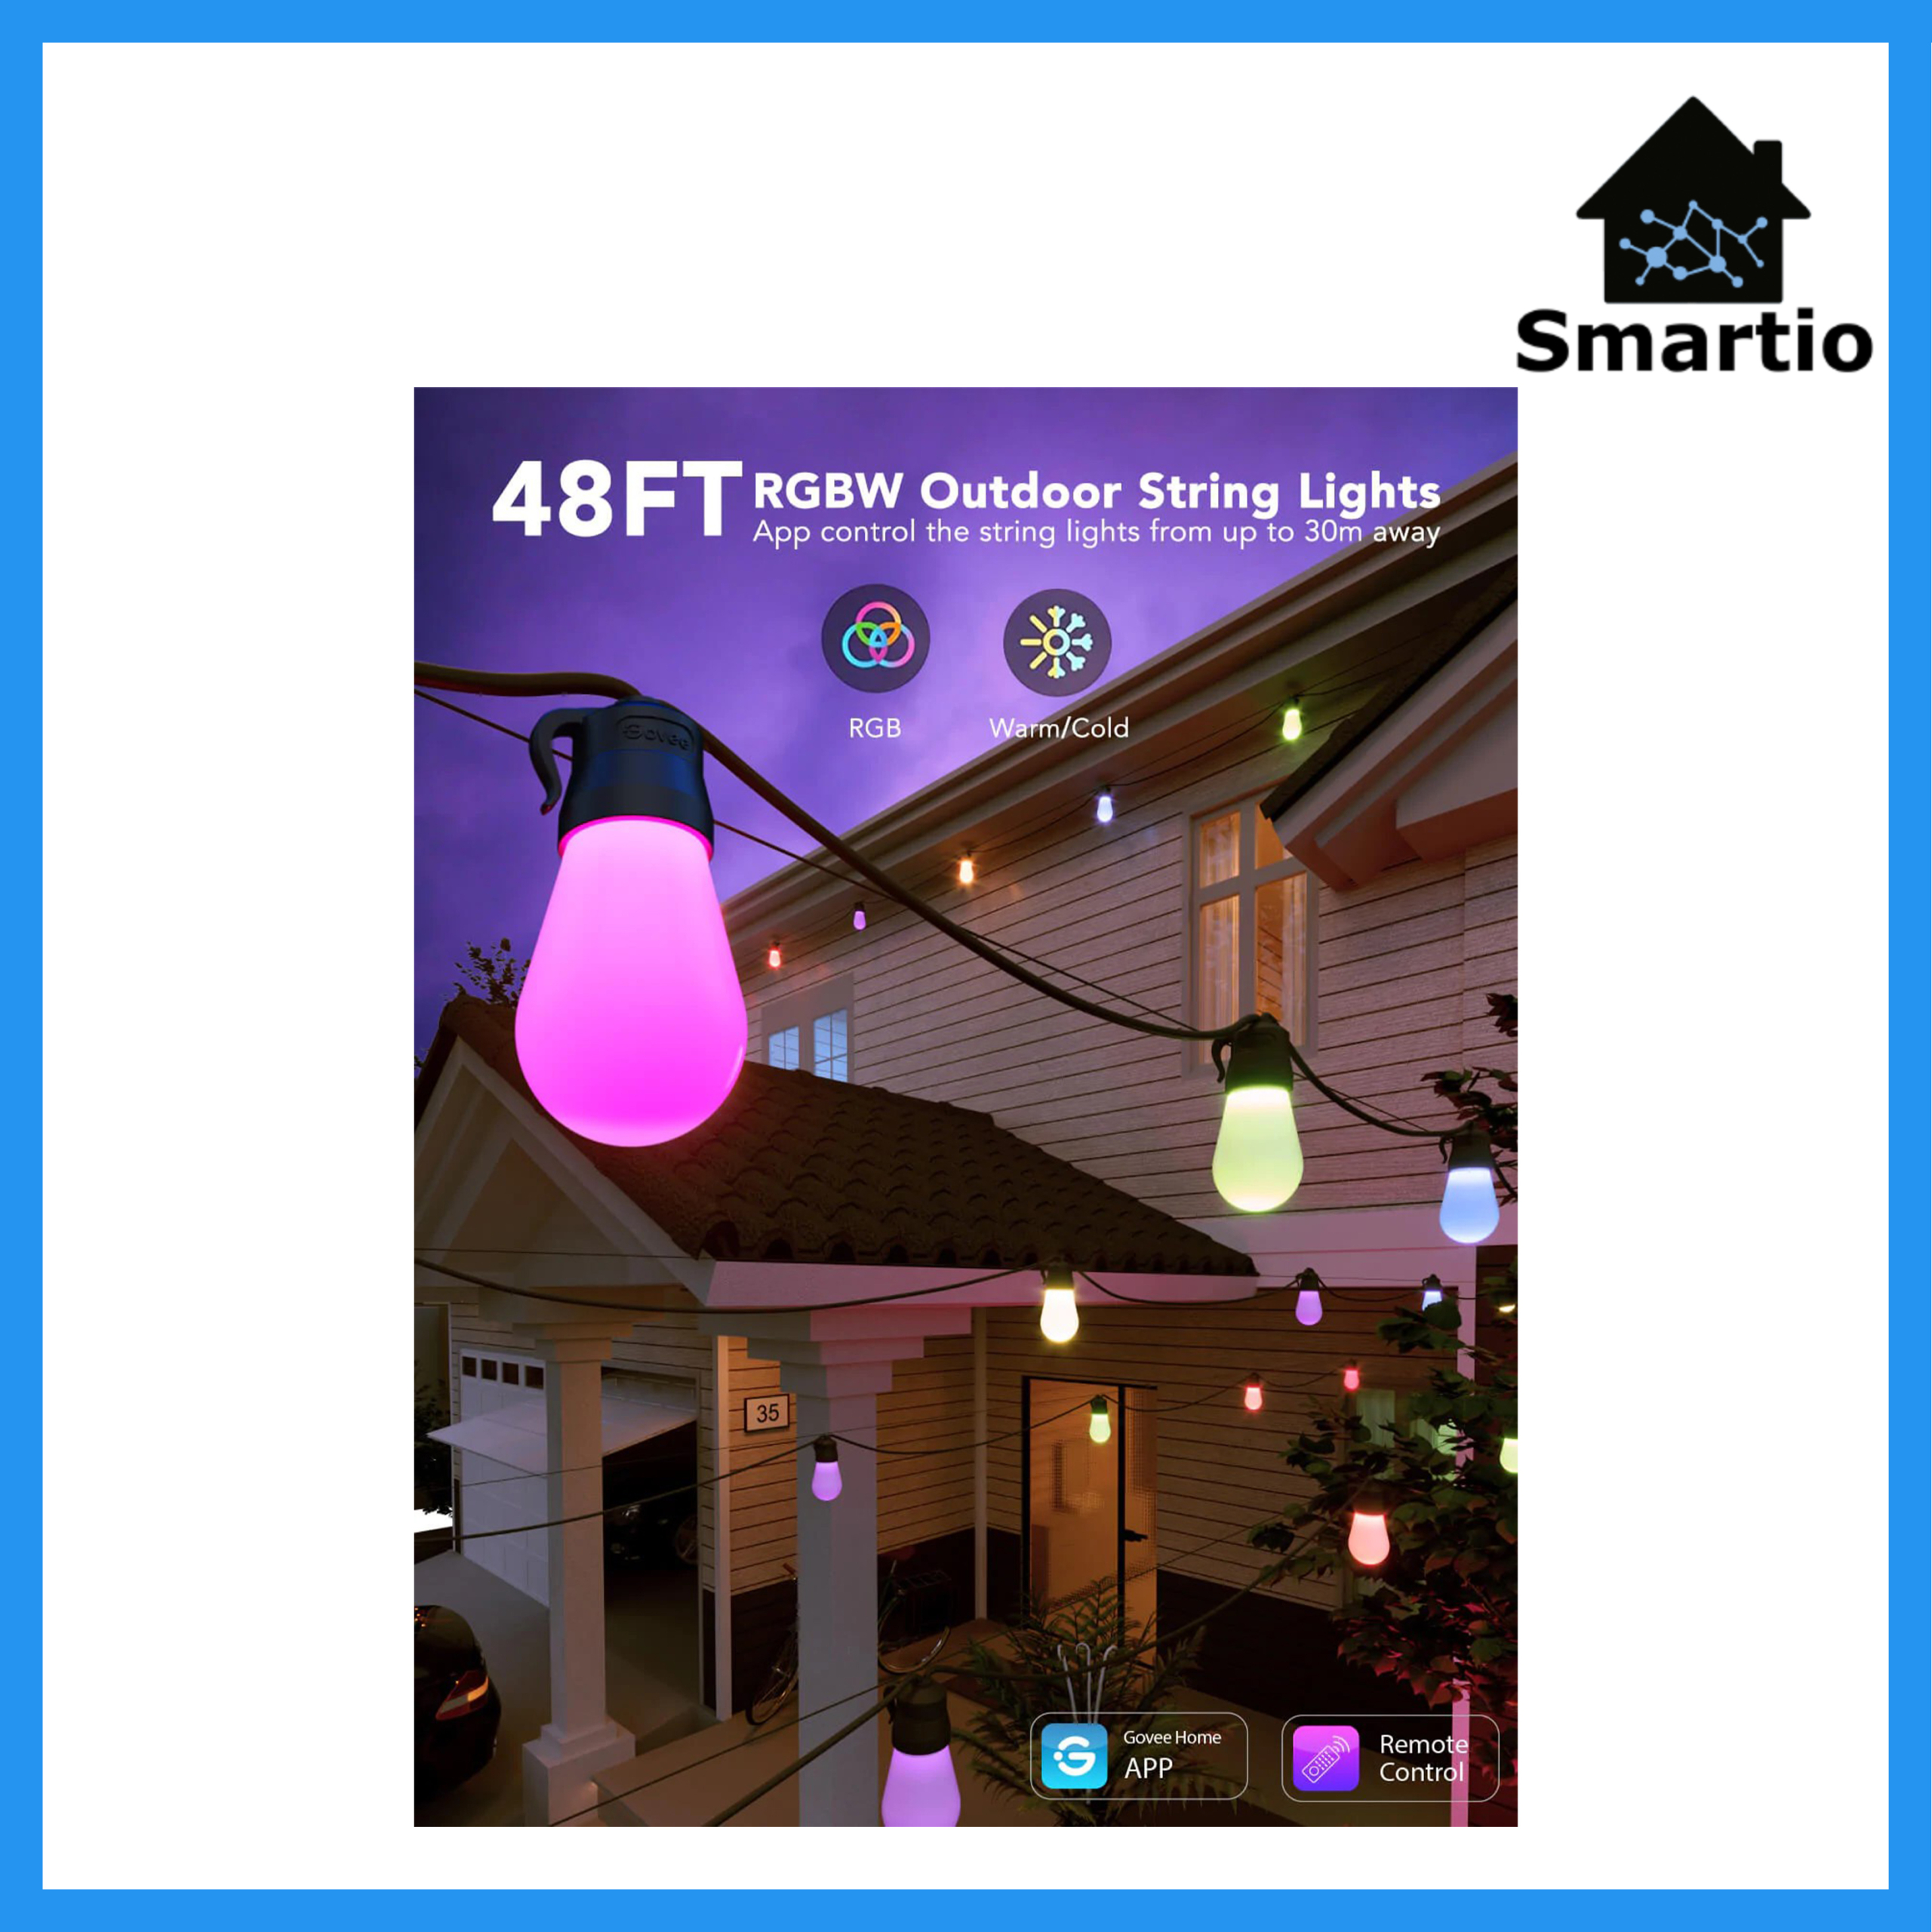 https://smartioleb.com/wp-content/uploads/2022/12/Govee-RGBIC-Warm-White-Wi-Fi-Bluetooth-Smart-Outdoor-String-Lights-6-scaled.jpg